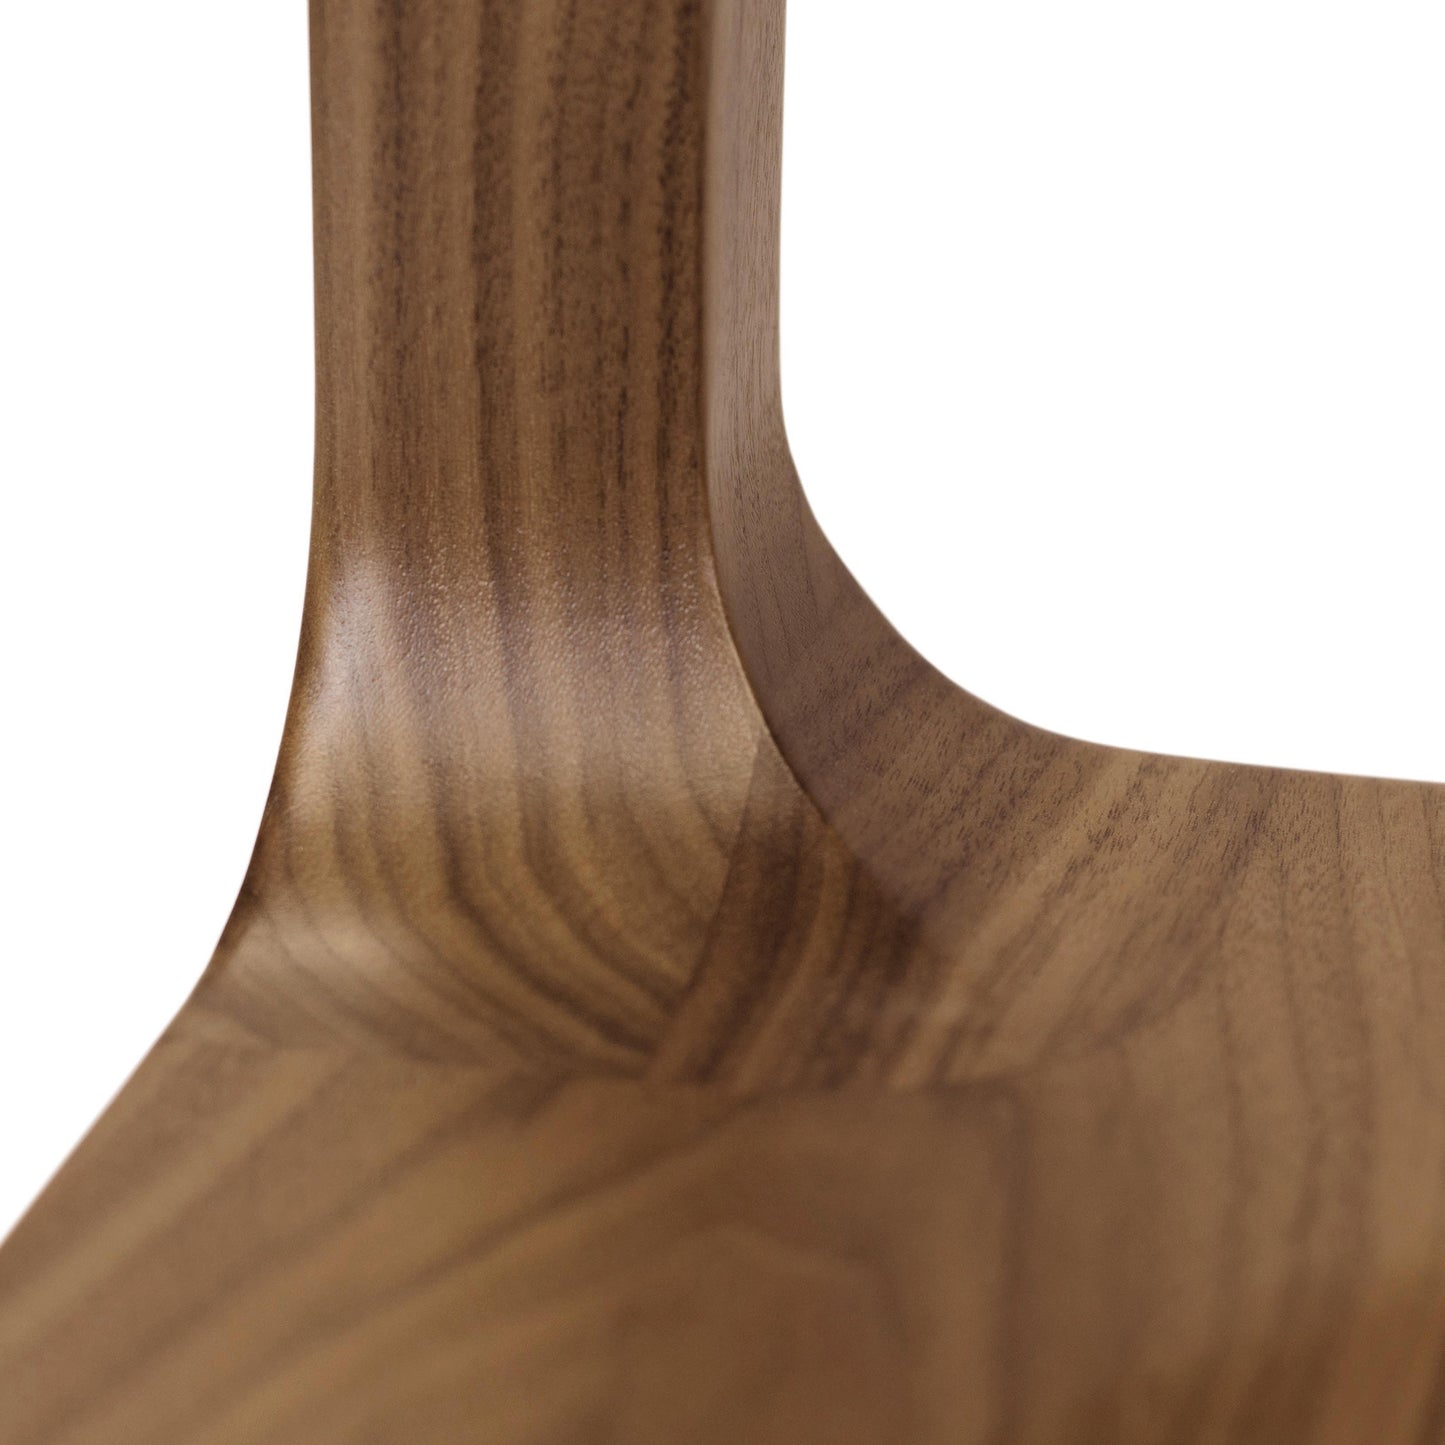 A close up view of a walnut dining table.